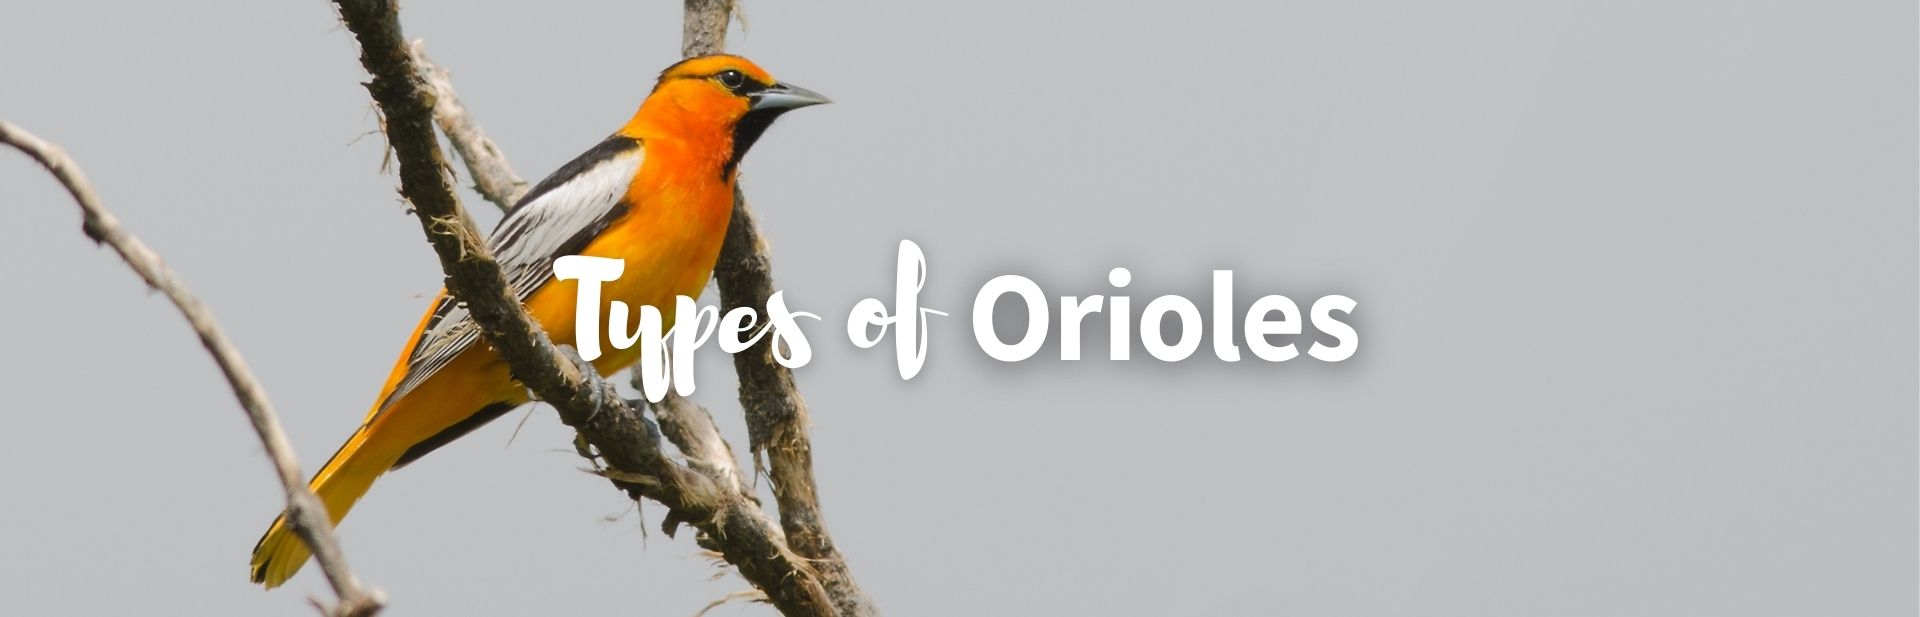 9 Types of Orioles in North America: ID Guide with Facts, Chart and Pictures